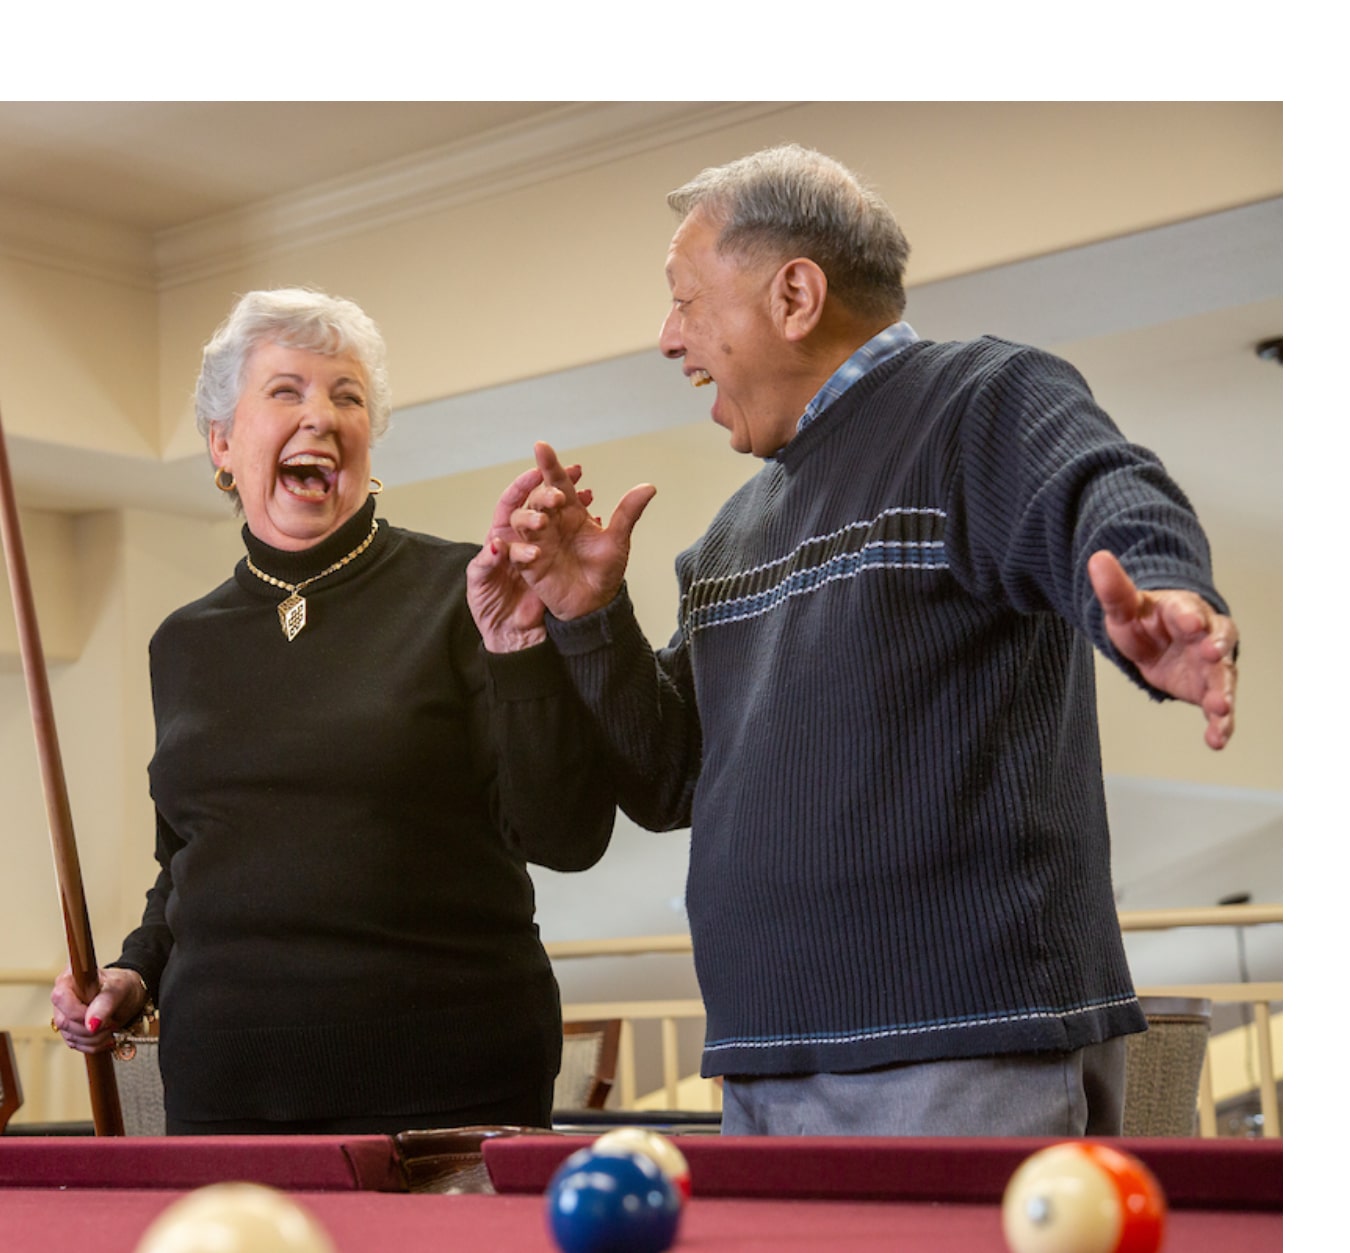 Two elderly individuals are laughing and enjoying a game of pool indoors. The woman on the left is holding a pool cue, and both have lively expressions and engaging body language. A pool table with balls is visible in the foreground.